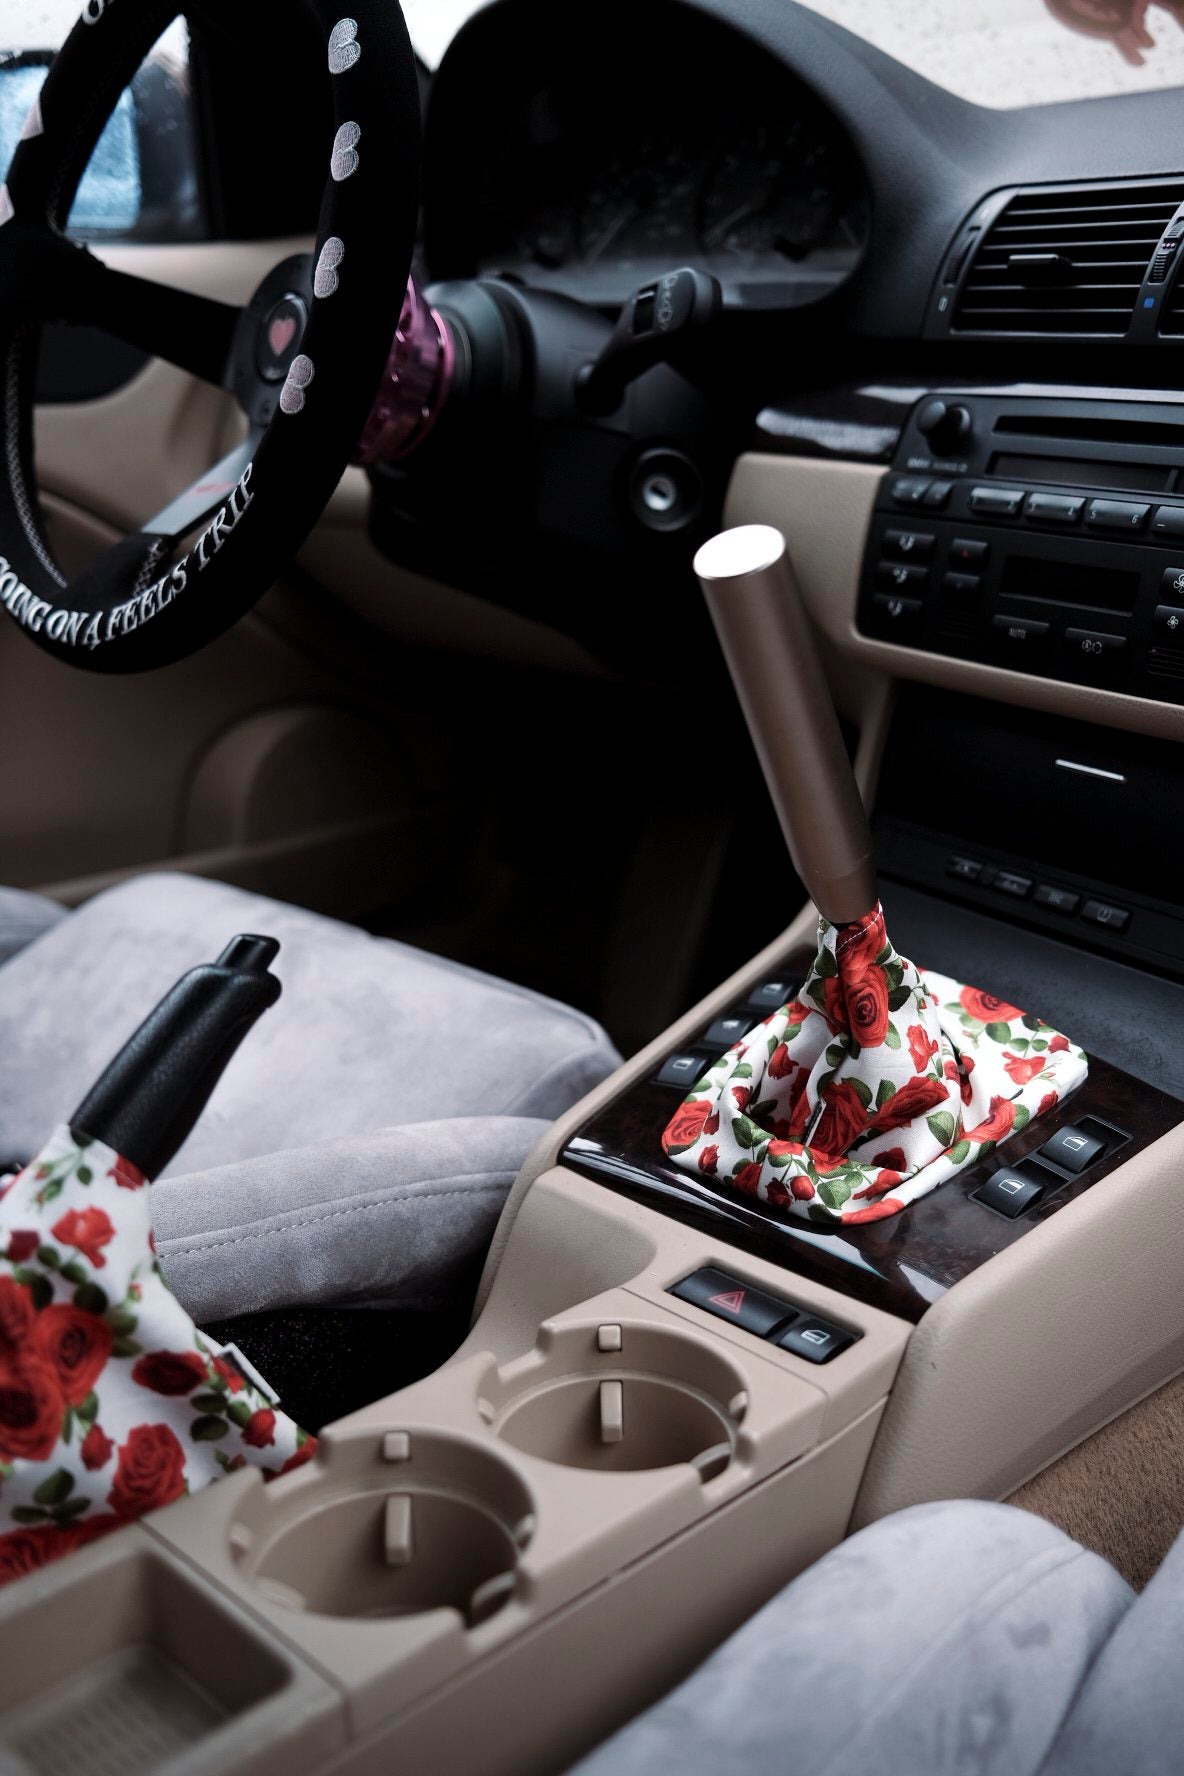 Red and White Rose Shift Boot